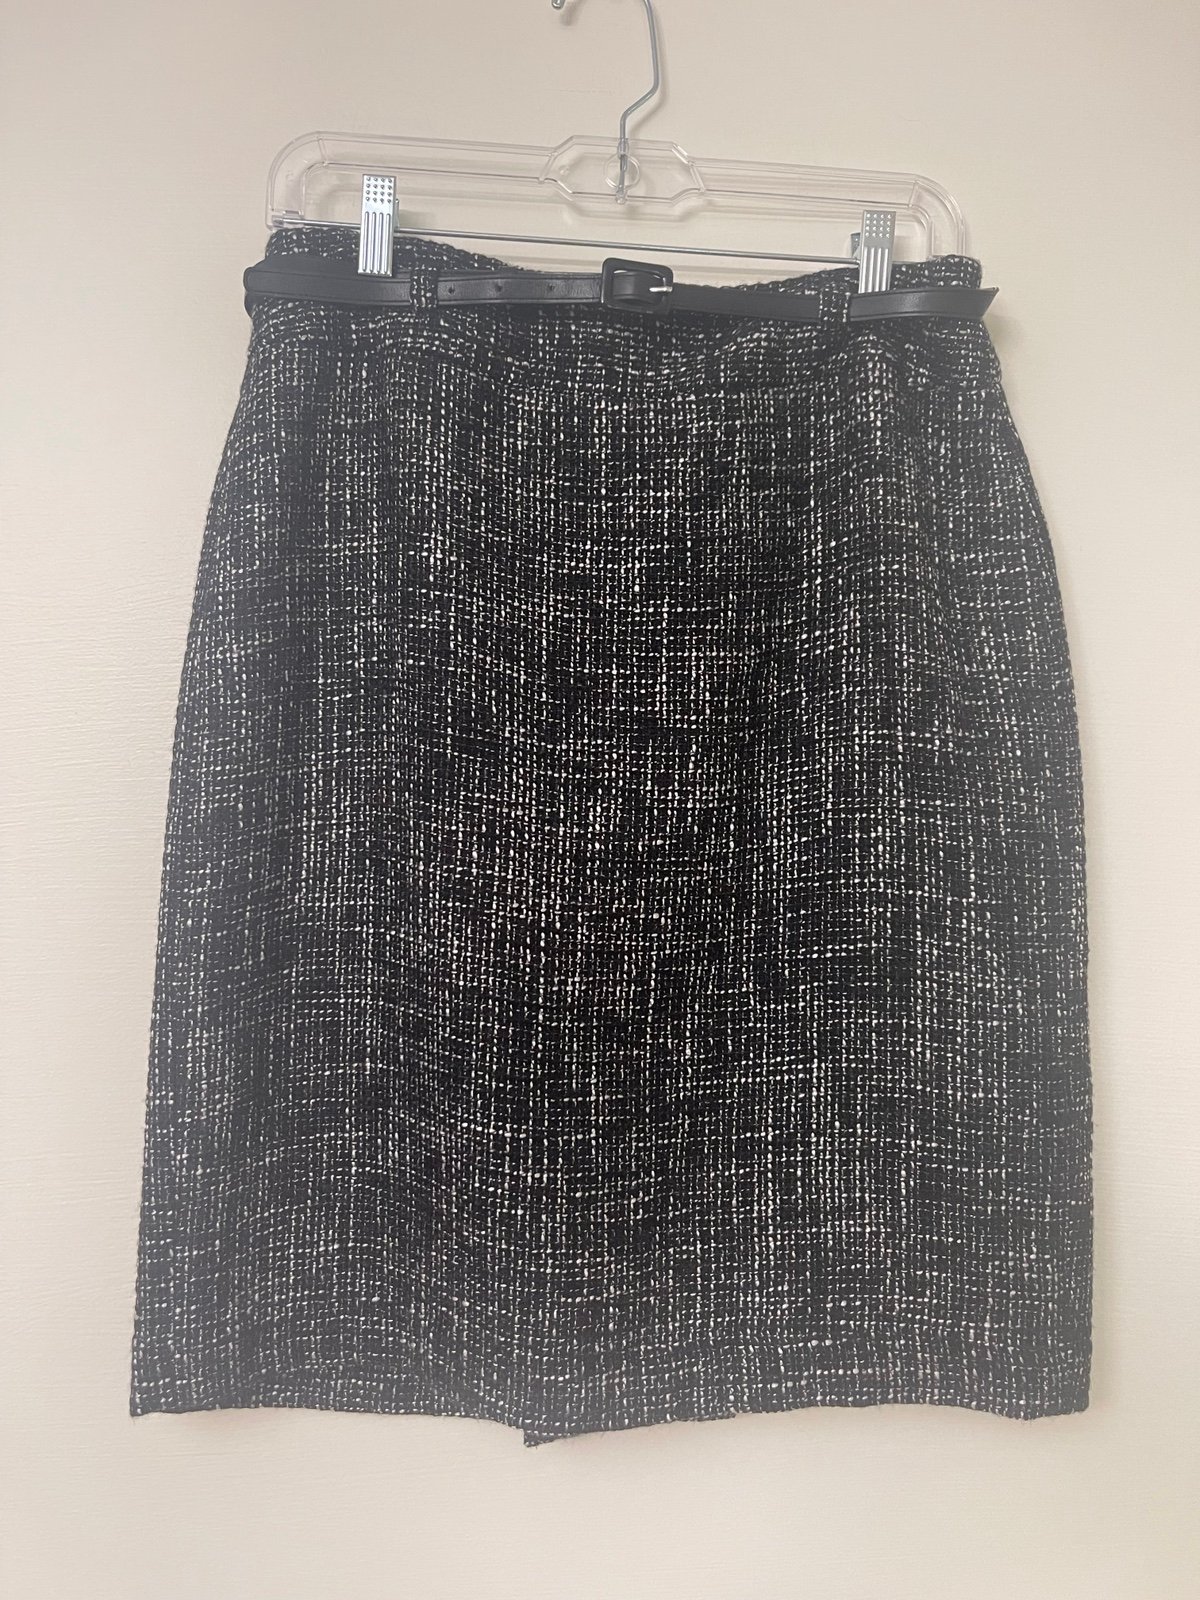 Exclusive Ann Taylor Loft Belted Pencil Skirt Size 6 pH